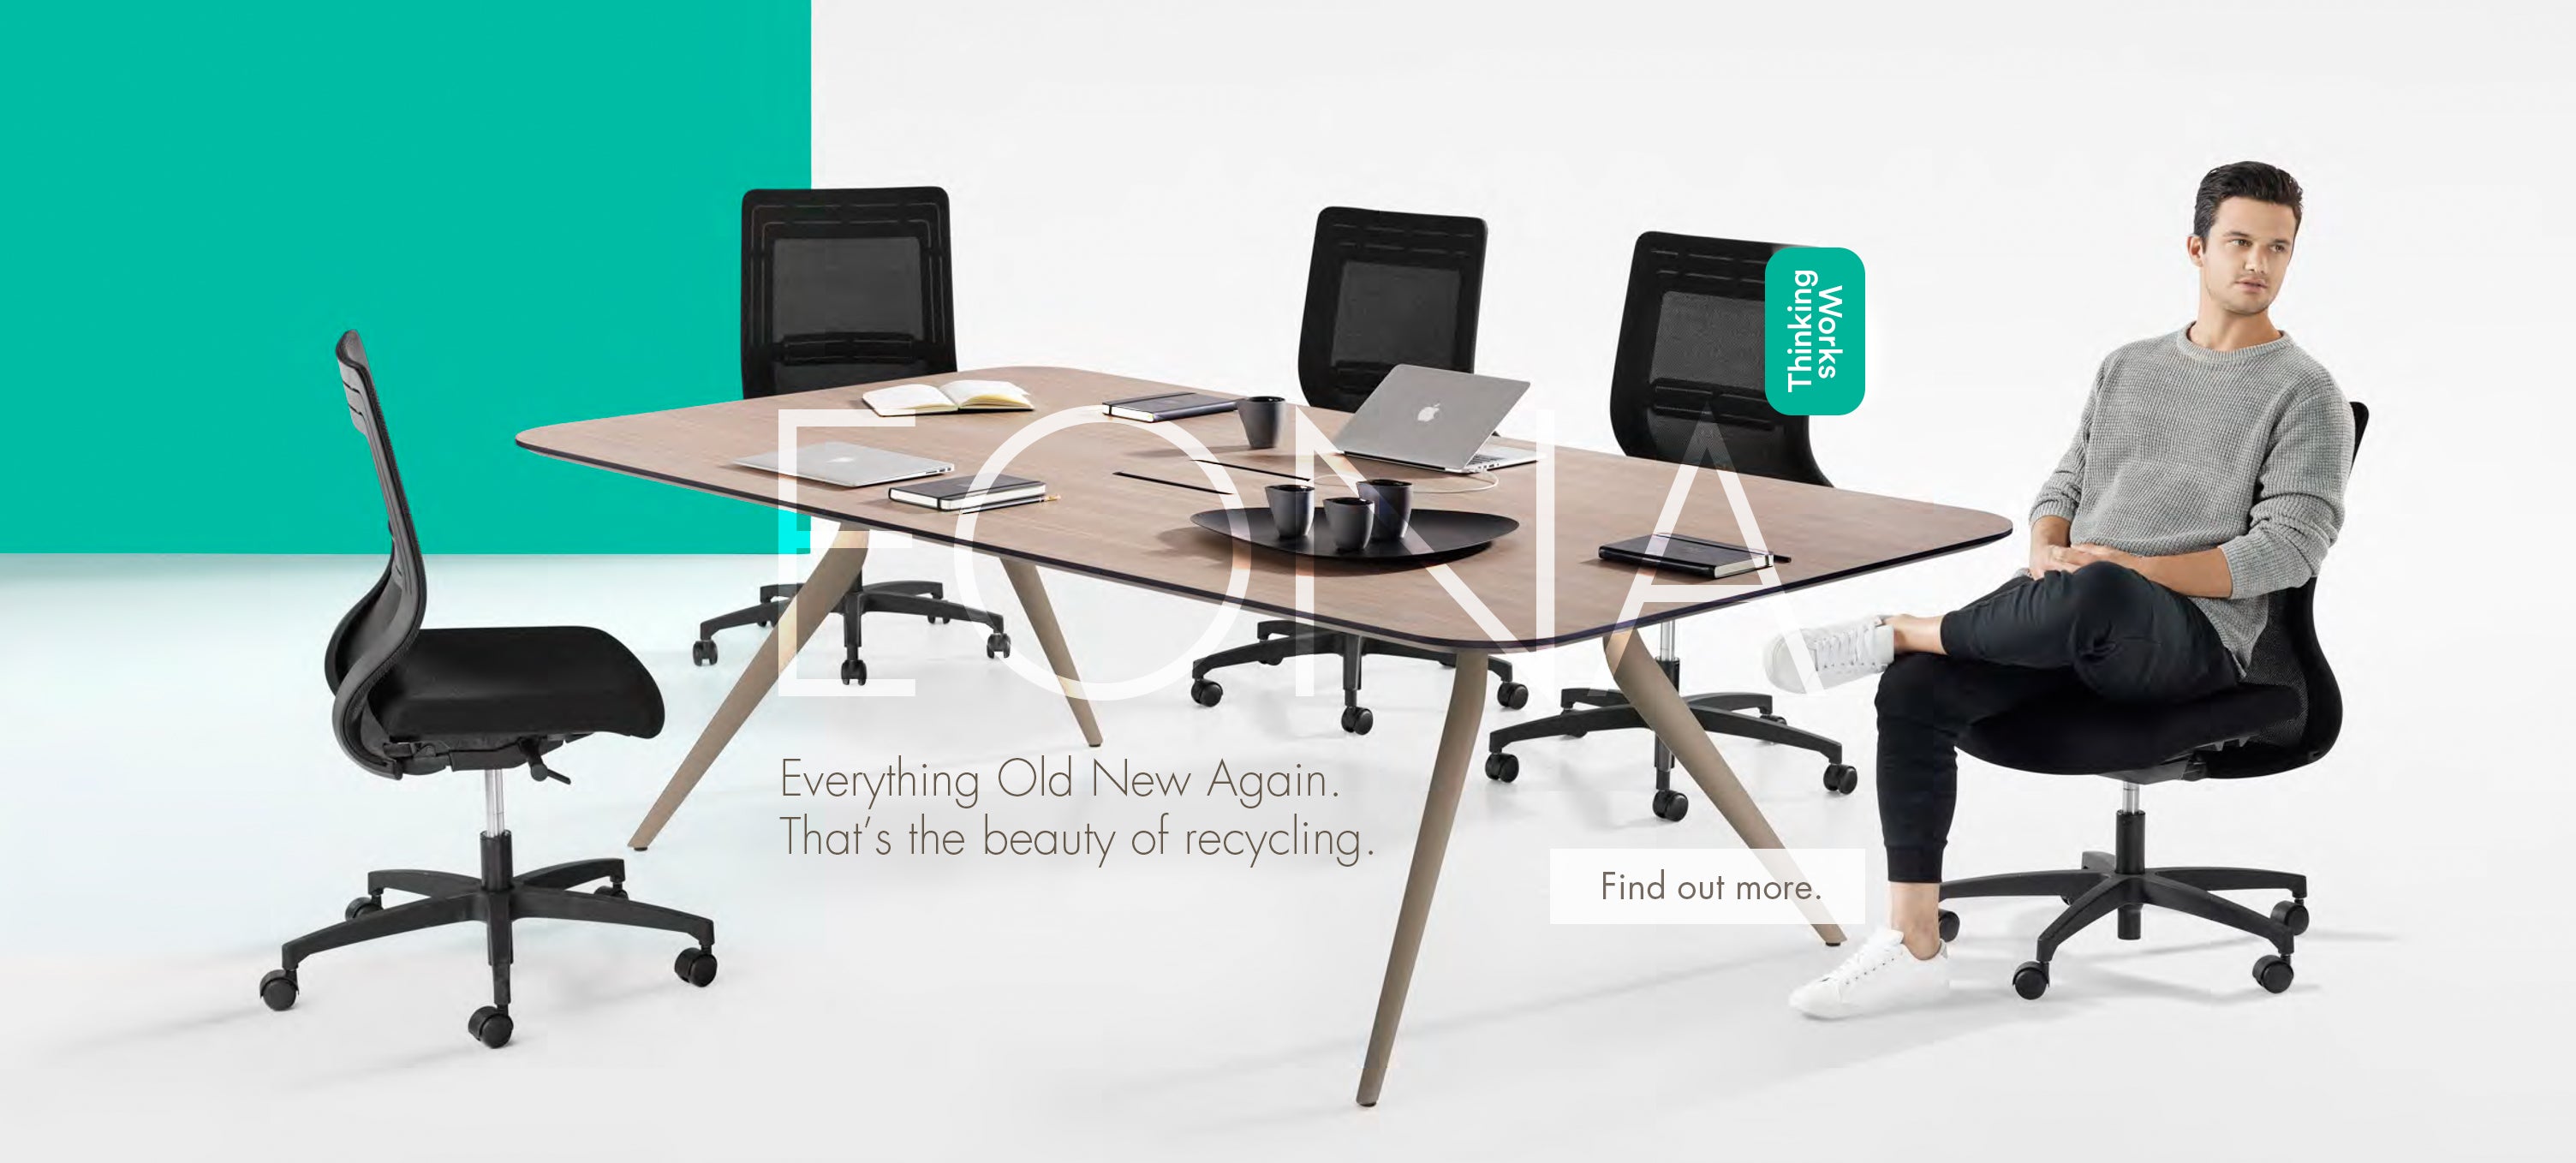 Thinking Works EONA meeting table